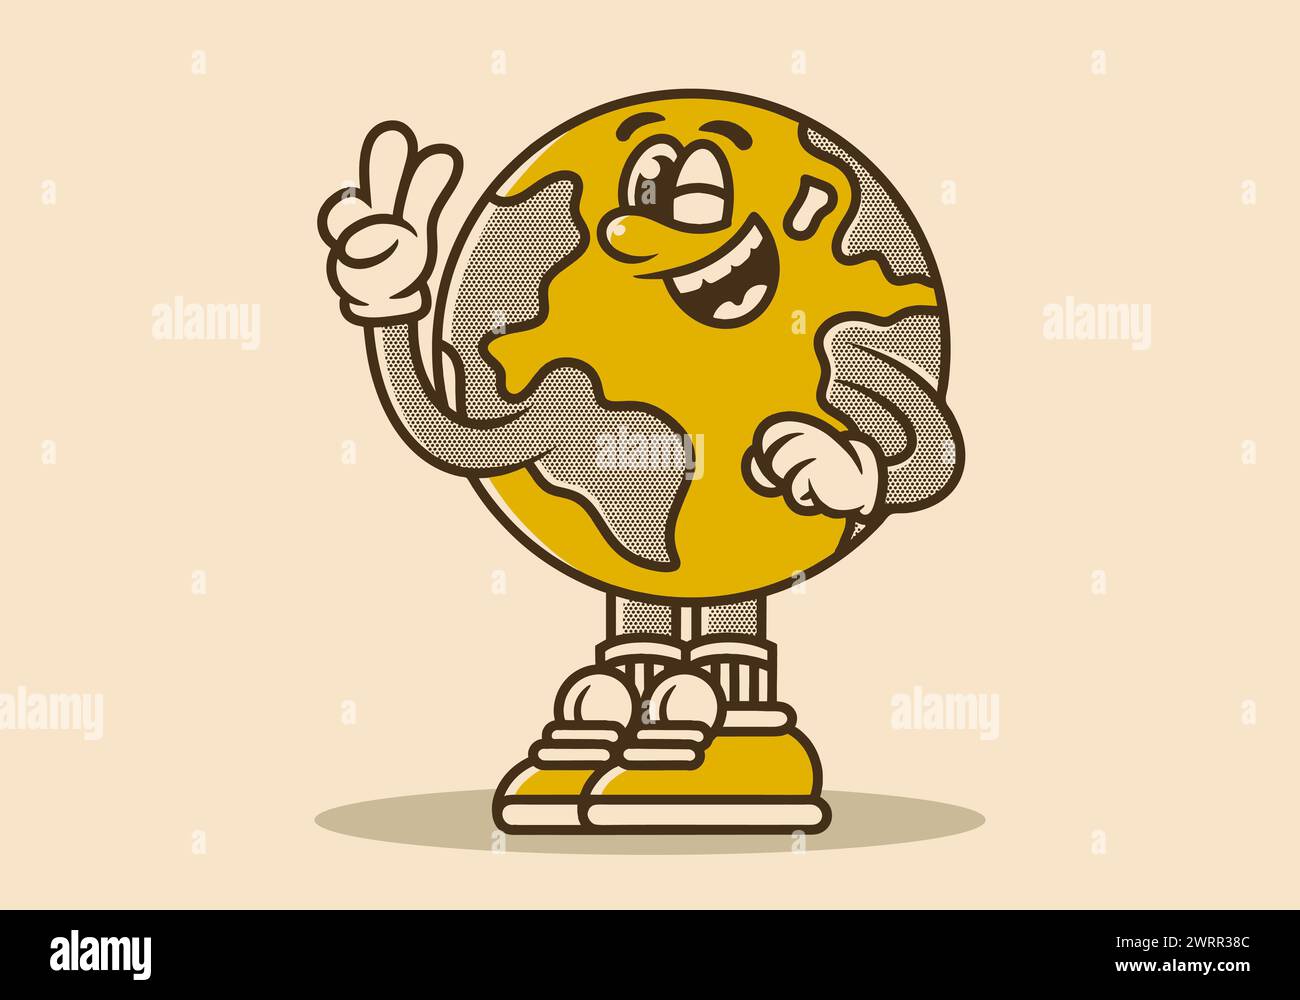 Mascot character illustration of earth with hands forming a symbol of peace. Vintage colors Stock Vector